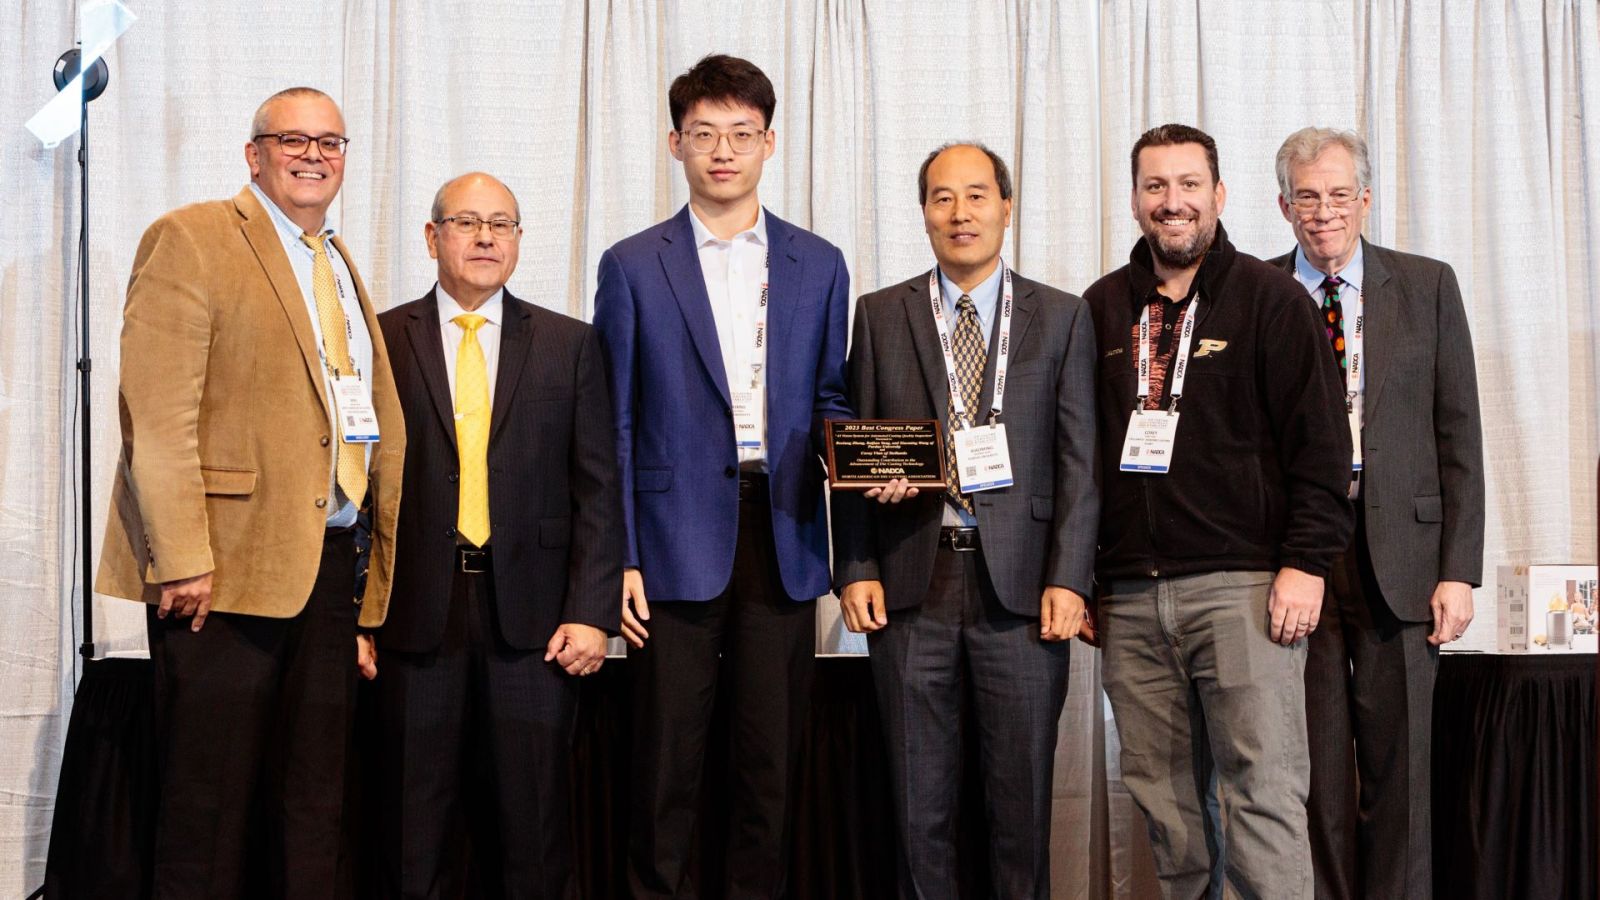 Starting from the center and proceeding right, Boxiang Zhang, Xiaoming Wang and Corey Vian accept the award for Best Congress Paper alongside representatives from NADCA. (Photo provided)